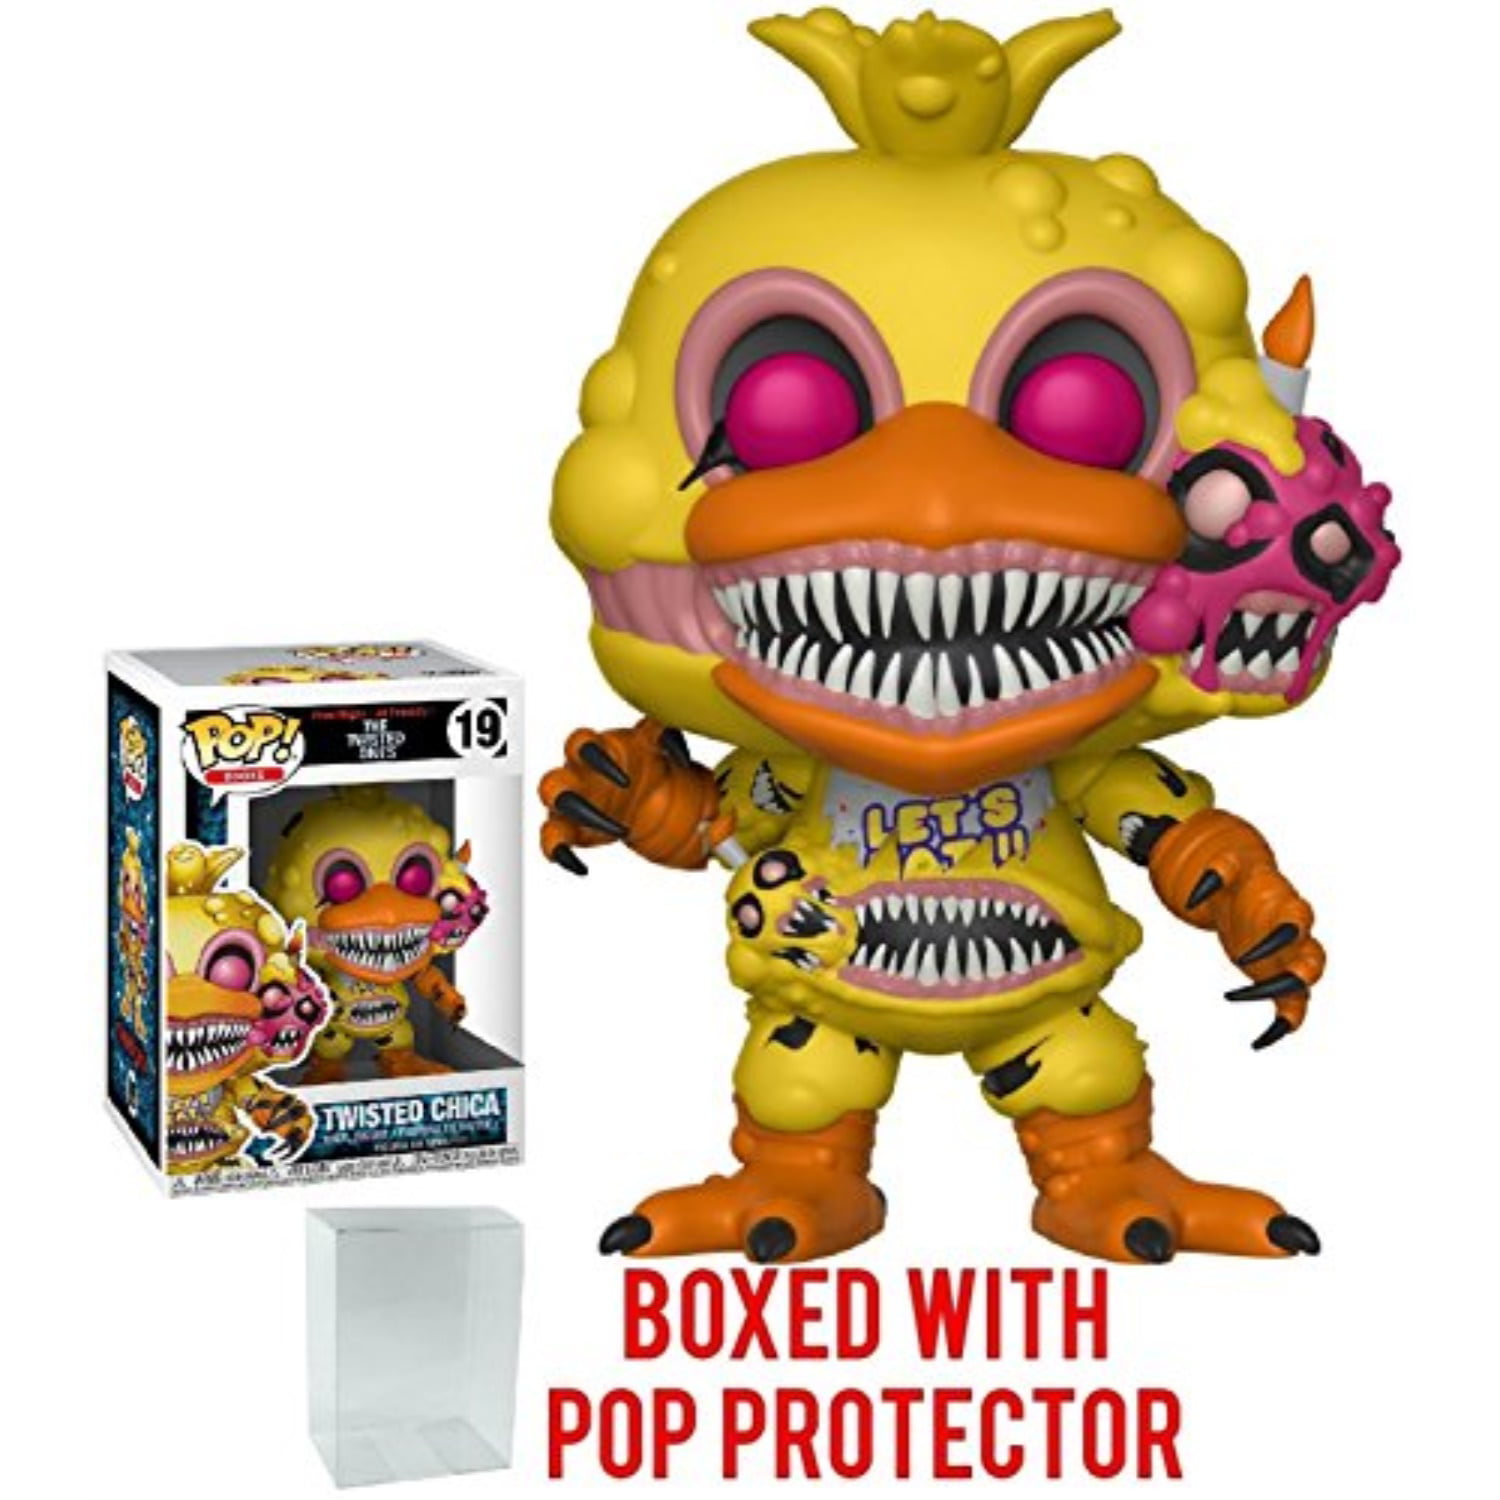 Funko Pop Bundled with Pop Box Protector Case Baby Vinyl Figure Games: Five Nights at Freddys Sister Location